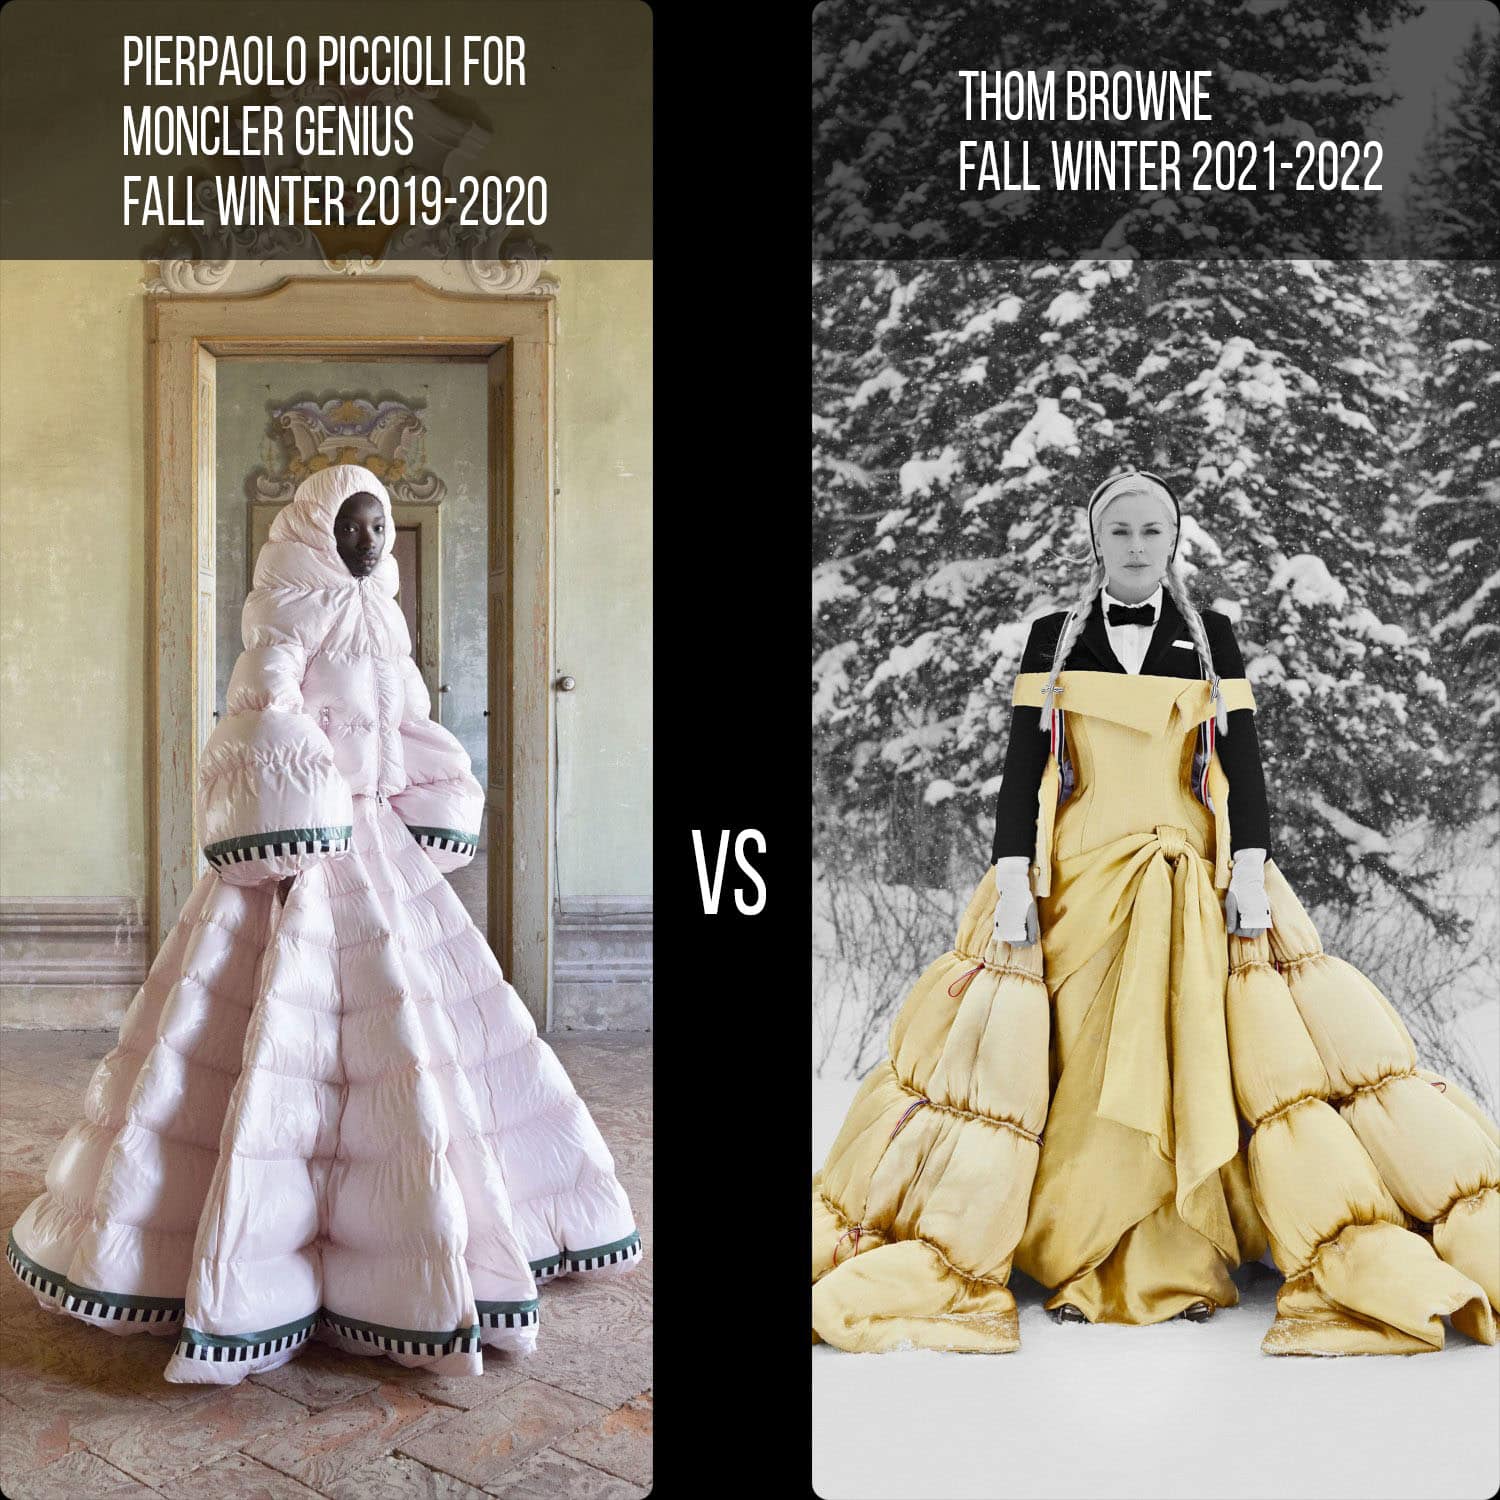 Moncler by Pierpaolo Piccioli Fall 2019-2020 vs Thome Browne Fall 2021-2022